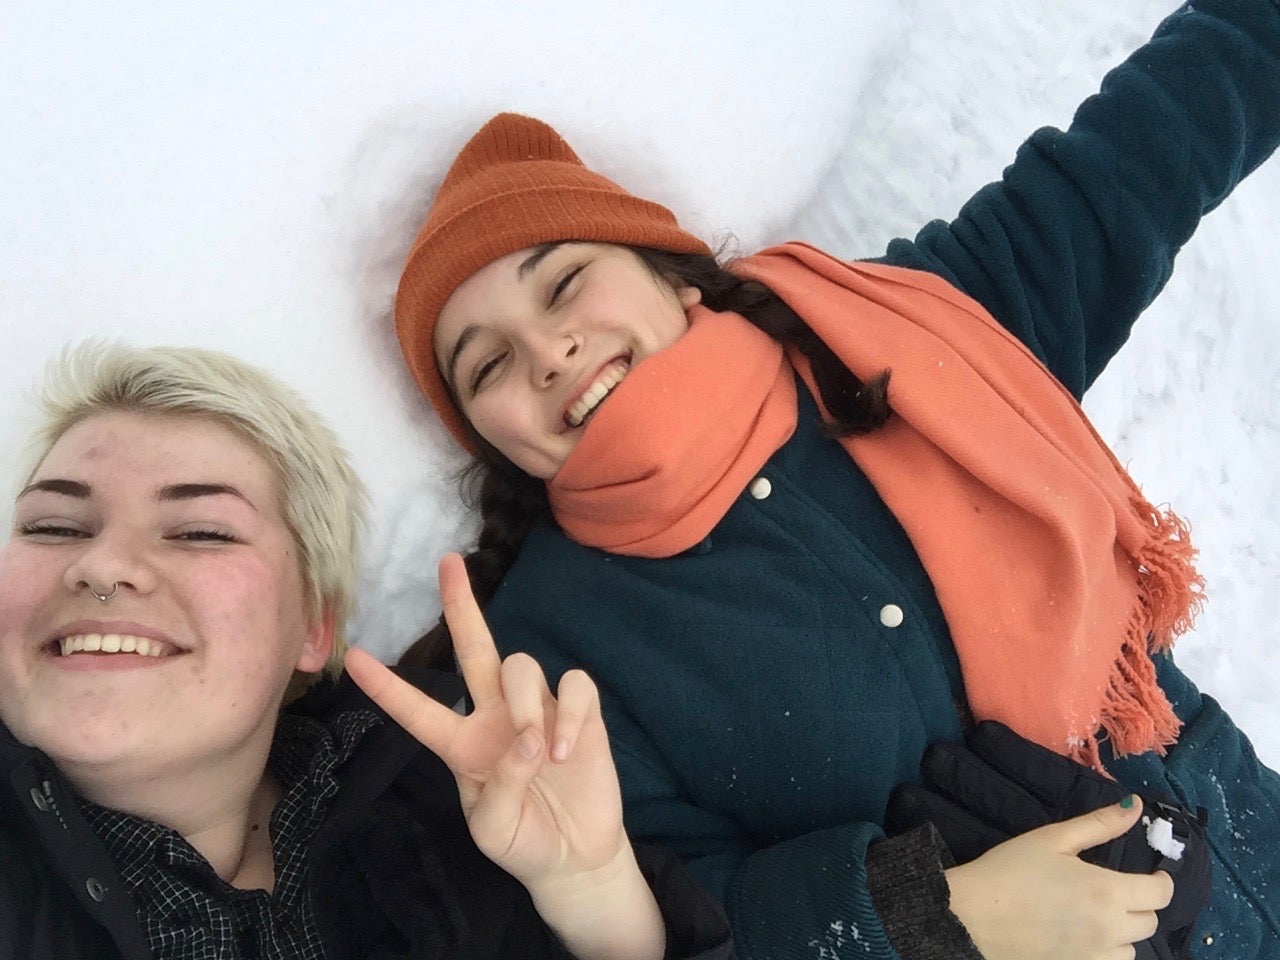 Hanne and Kira lie in the snow